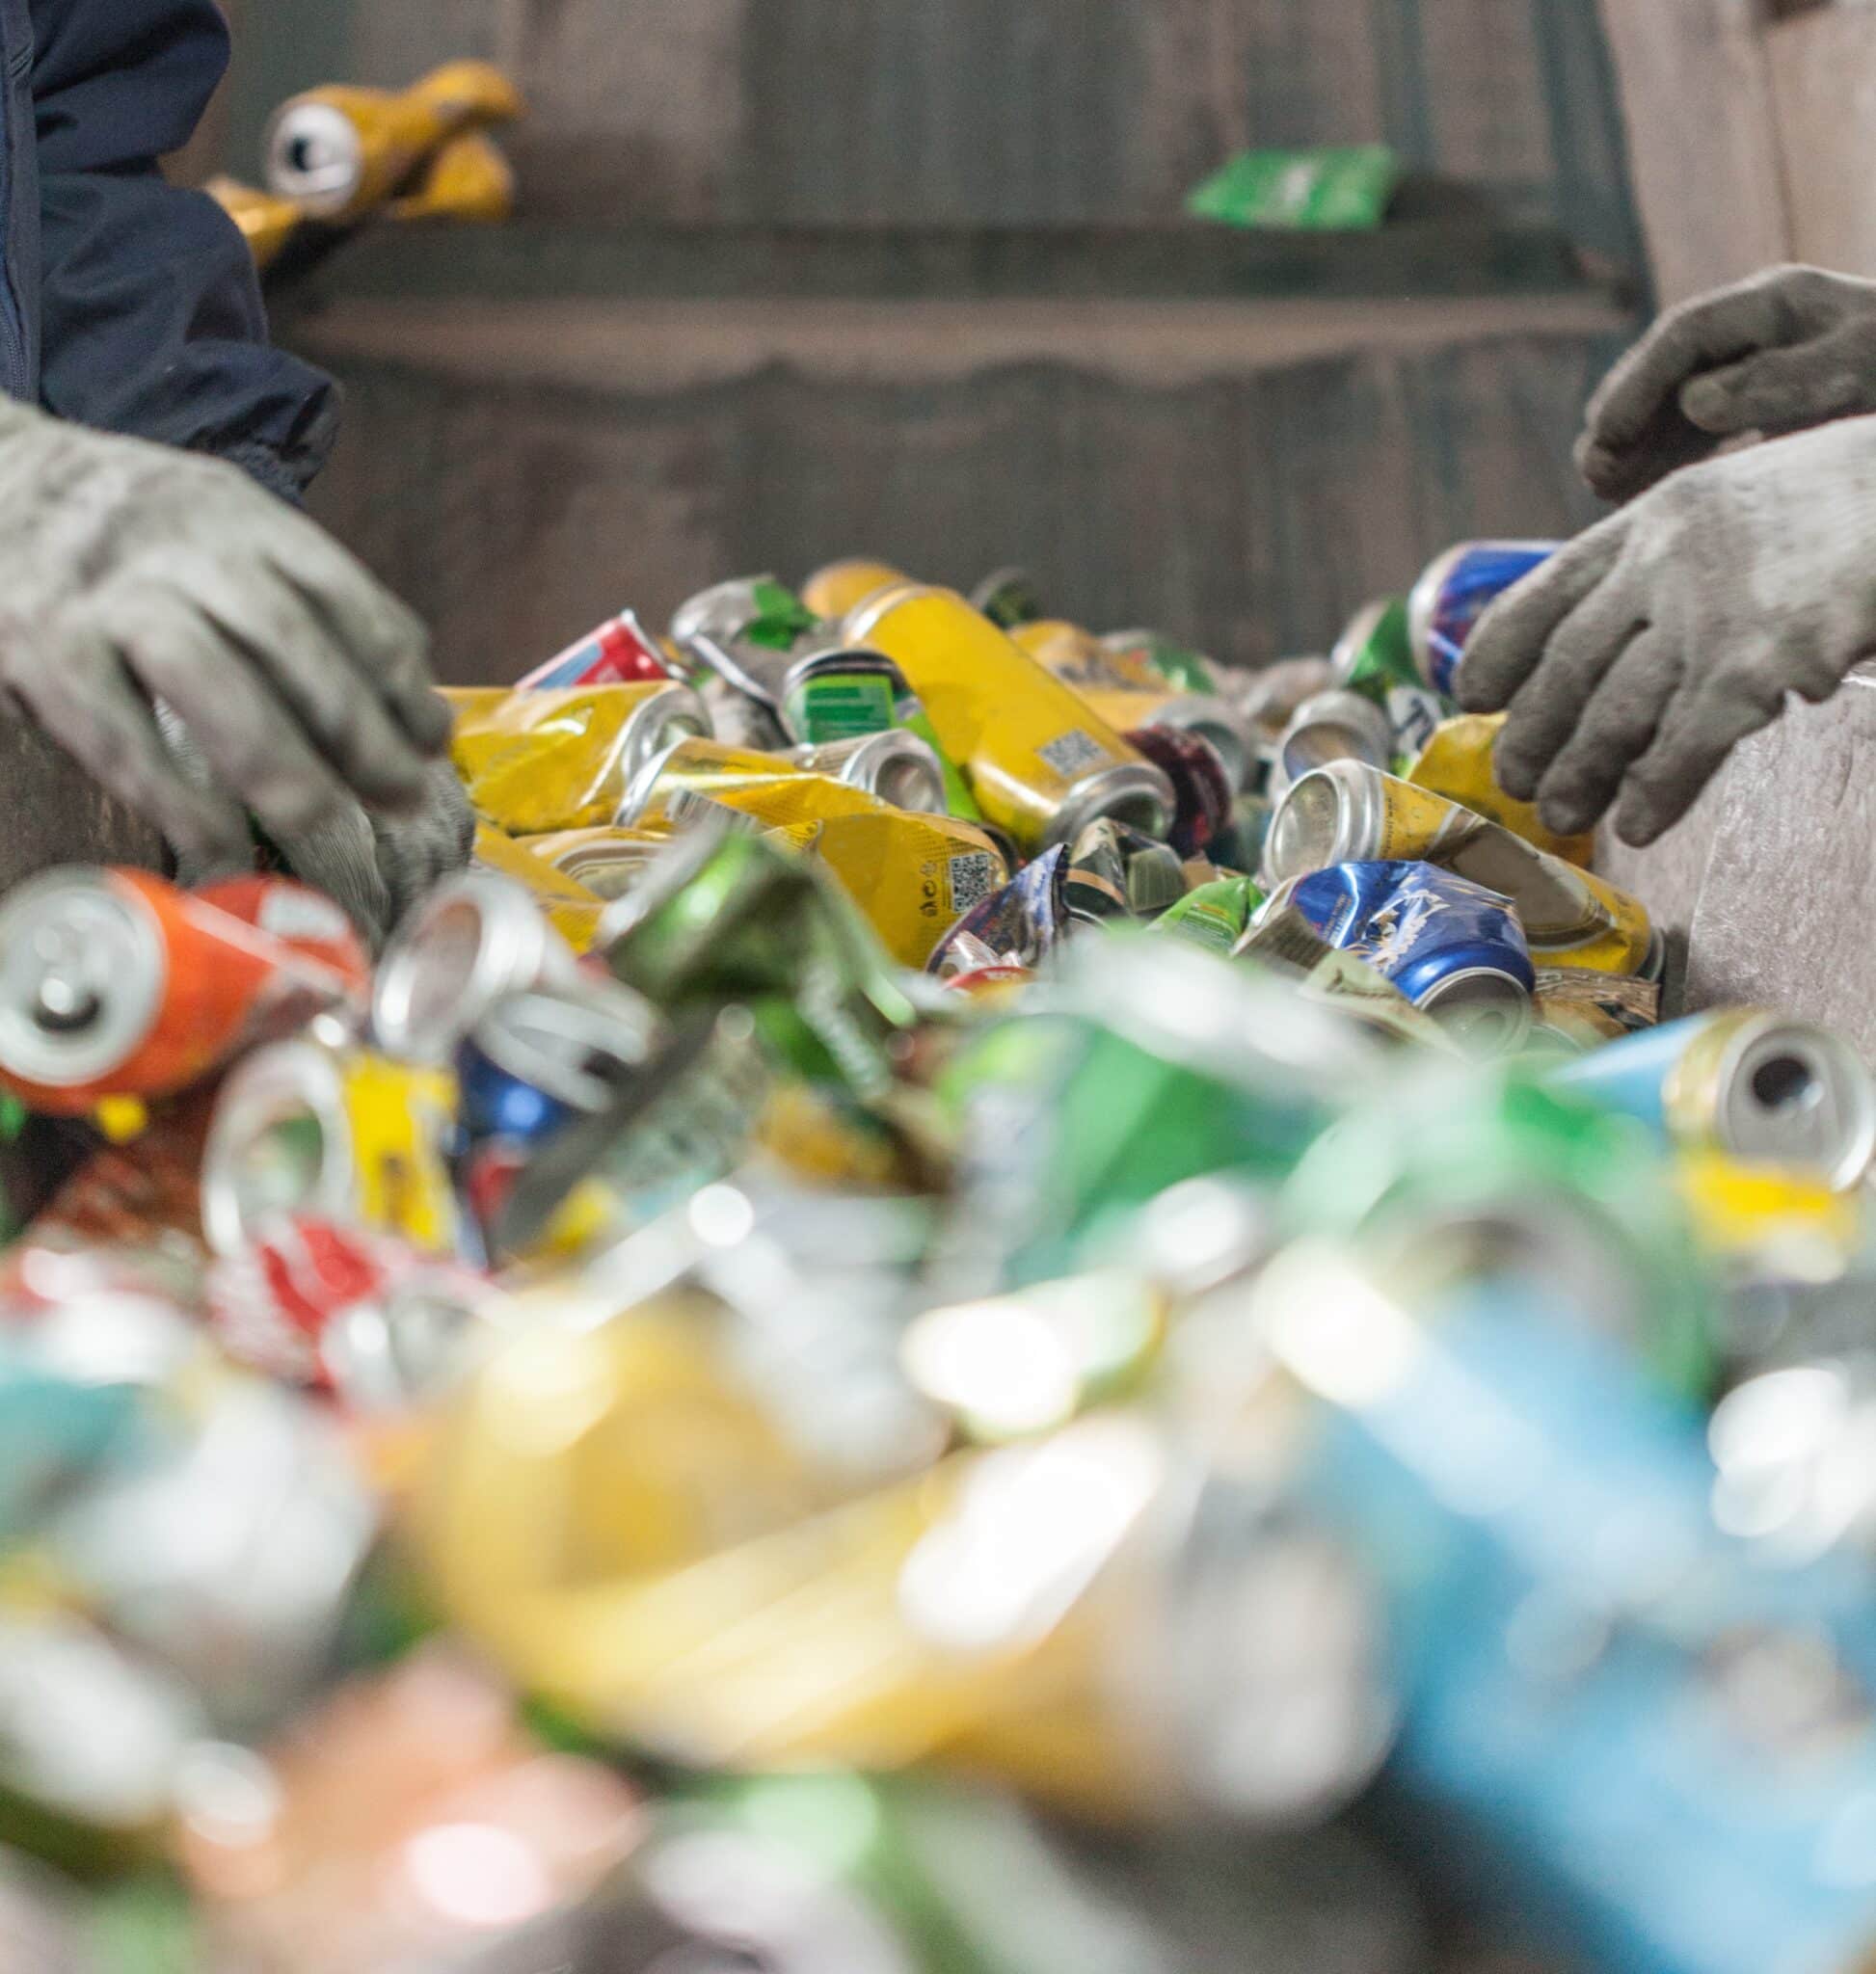 Aluminum cans being sorted at a recycling facility